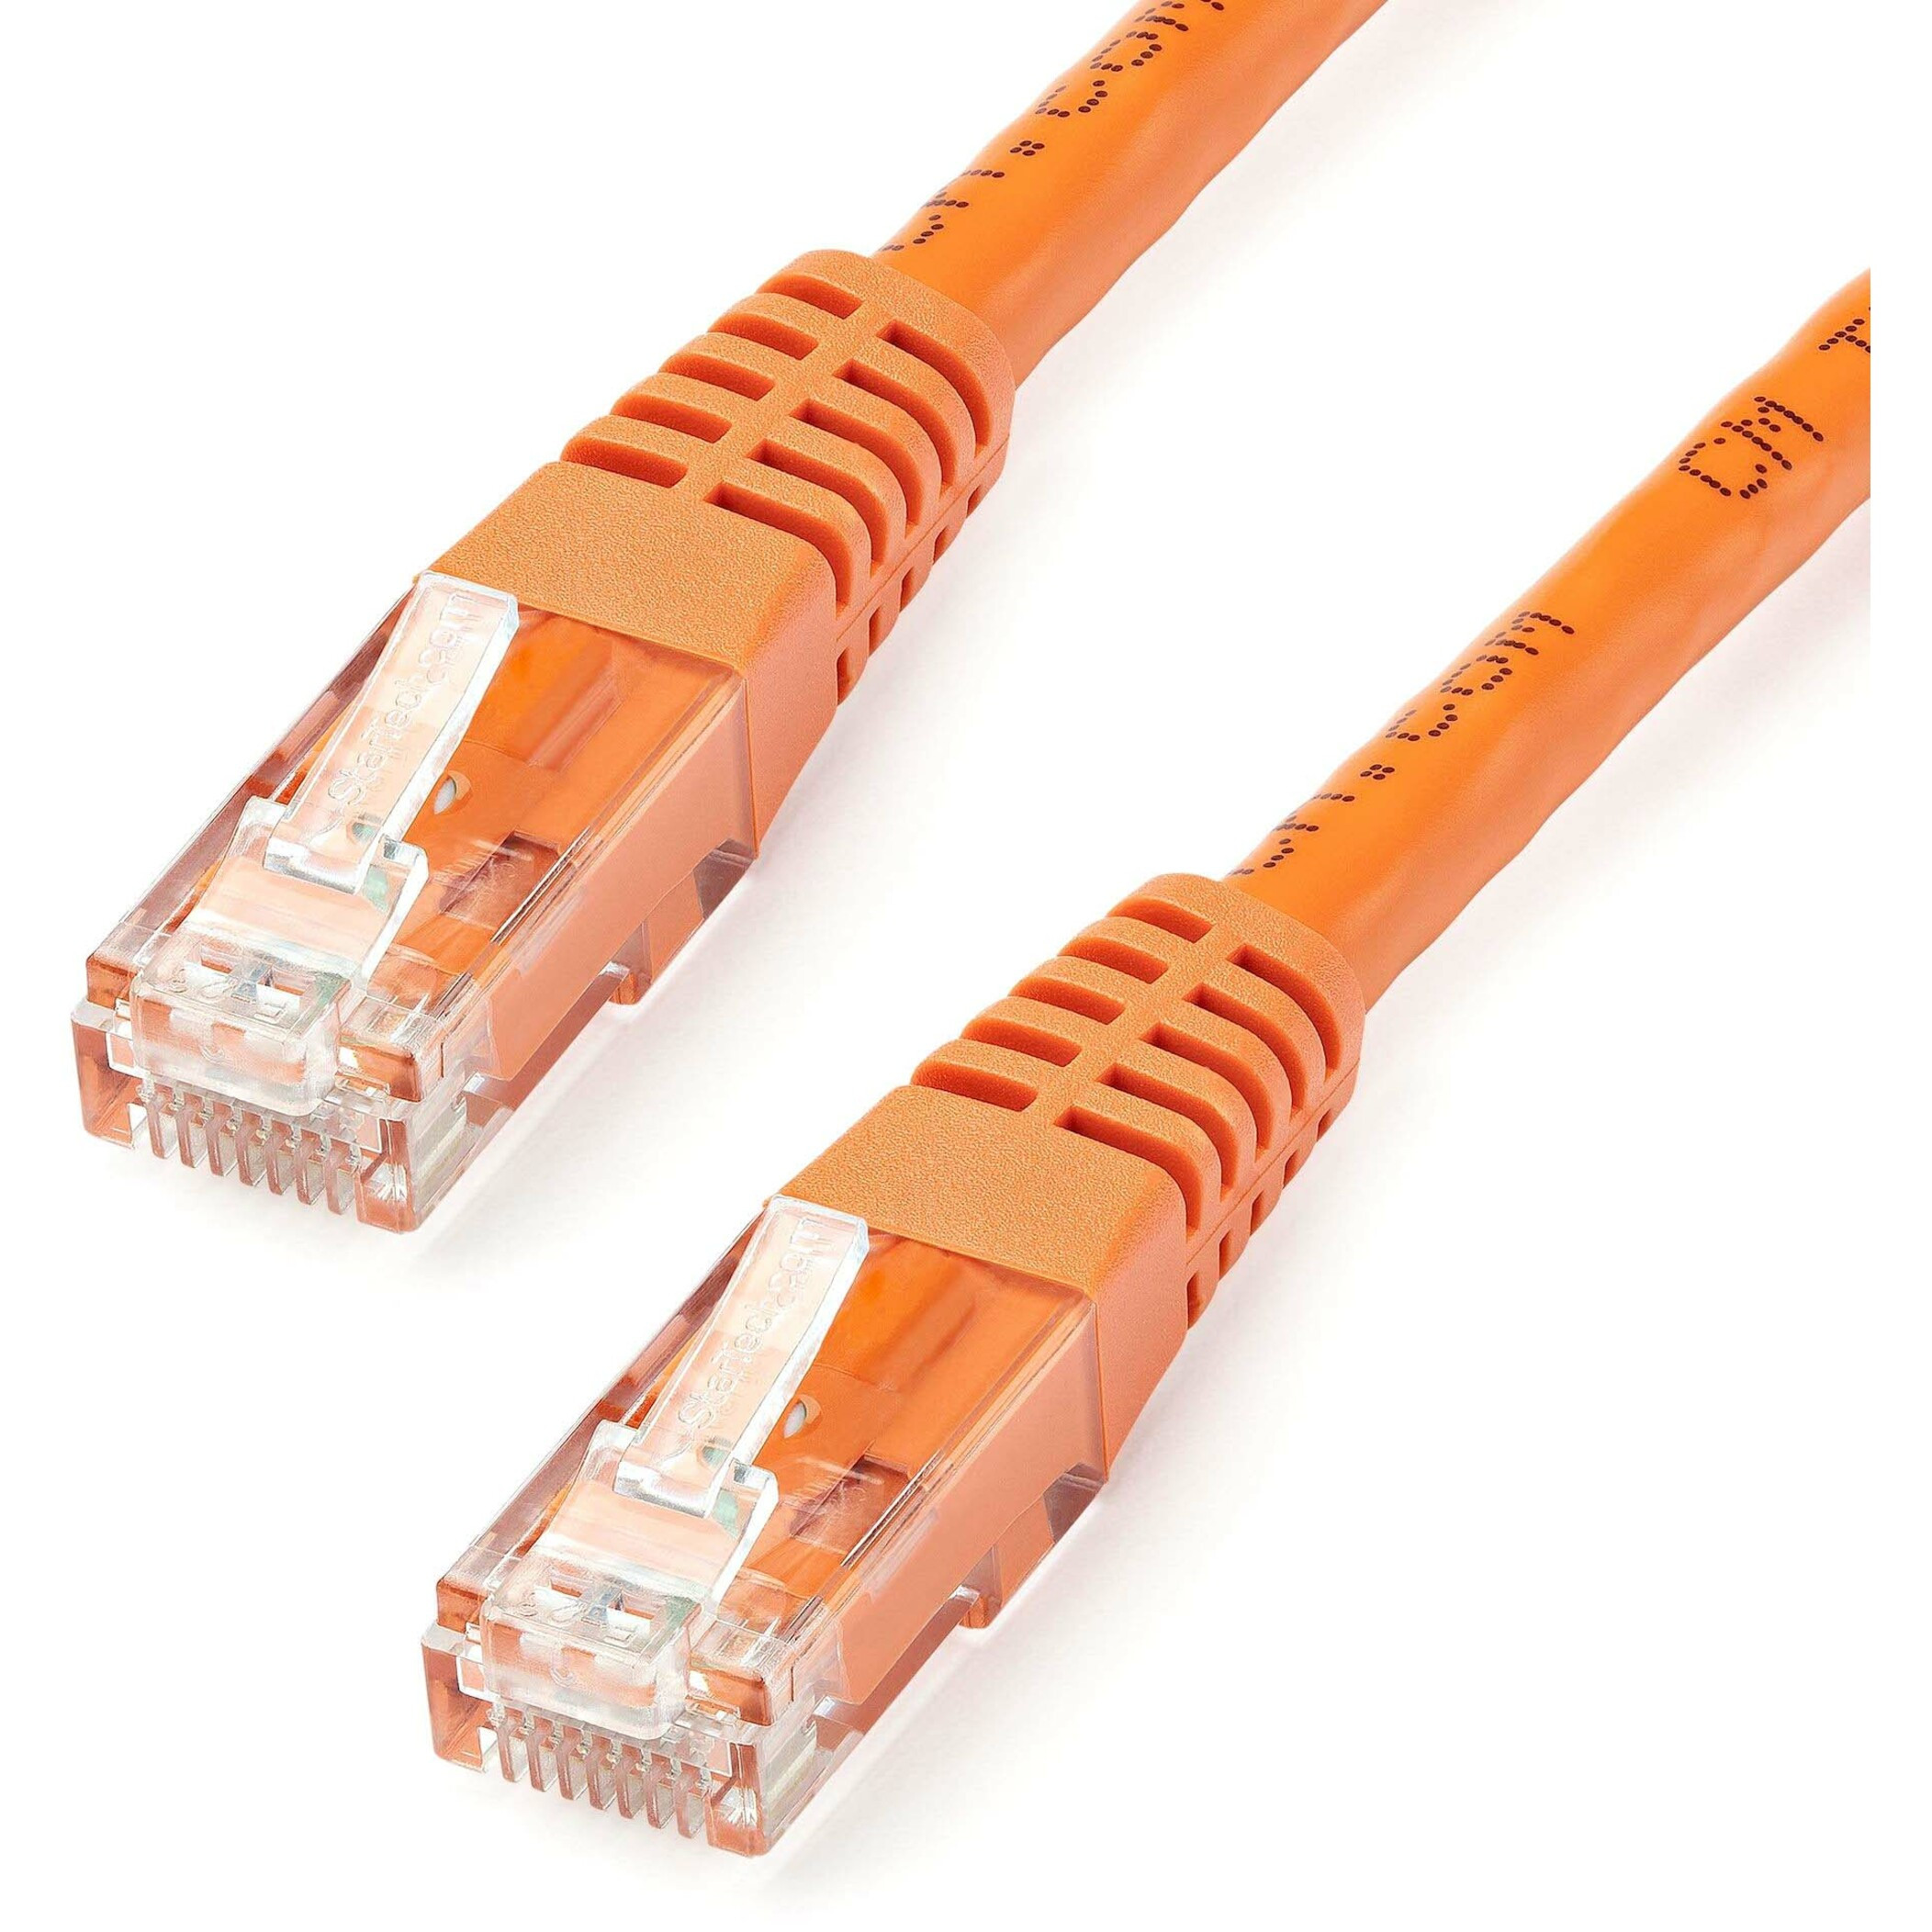 Startech .com 25ft CAT6 Ethernet CableOrange Molded Gigabit100W PoE UTP 650MHzCategory 6 Patch Cord UL Certified Wiring/TIA25ft O… C6PATCH25OR